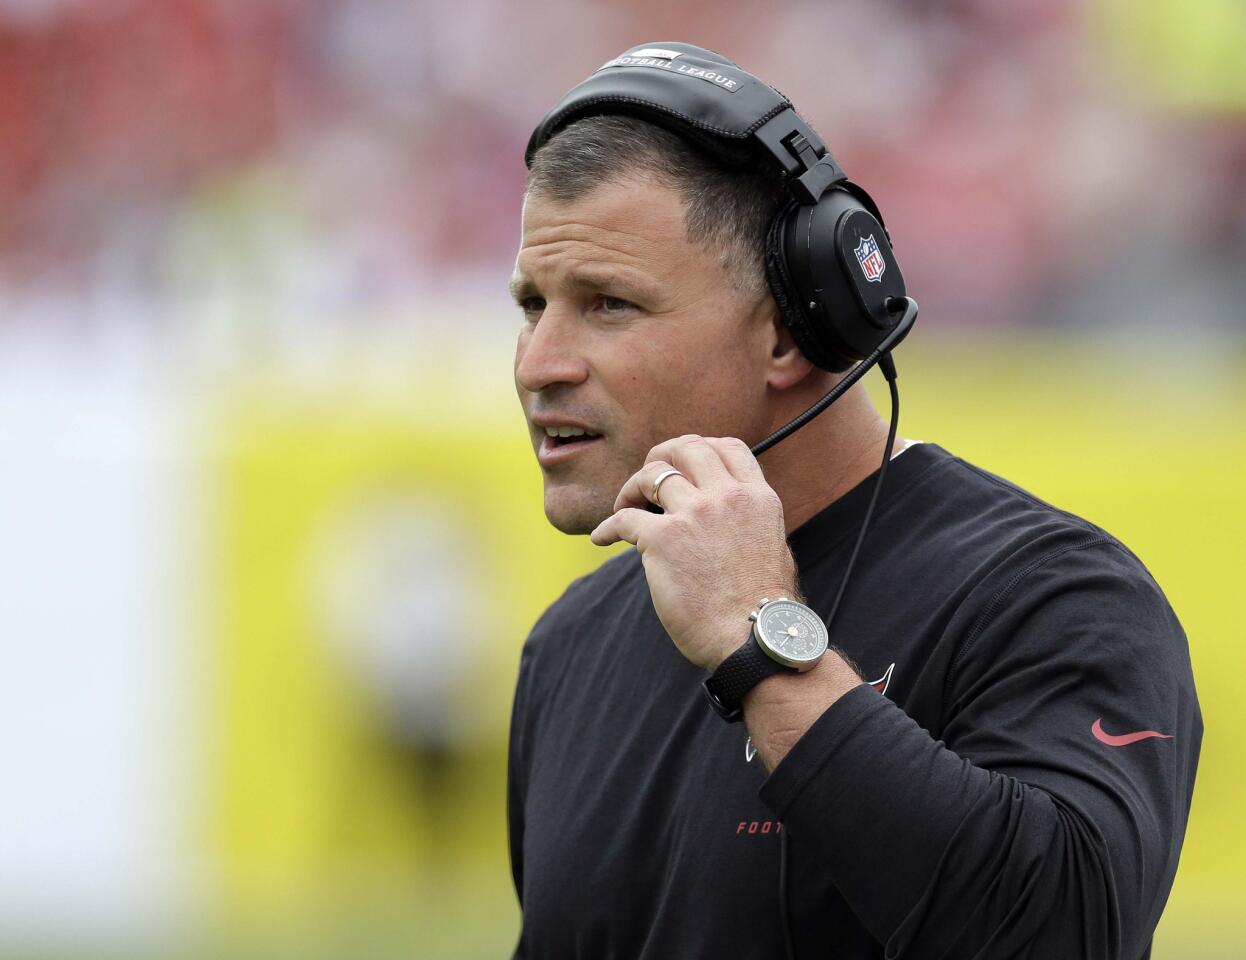 In this Sunday, Dec. 15, 2013 file photo, Tampa Bay Buccaneers head coach Greg Schiano watches during an NFL football game against the San Francisco 49ers. The Bucs announced Dec. 30, 2013 that they fired Schiano, who was UM's defensive coordinator from 1999-2000.